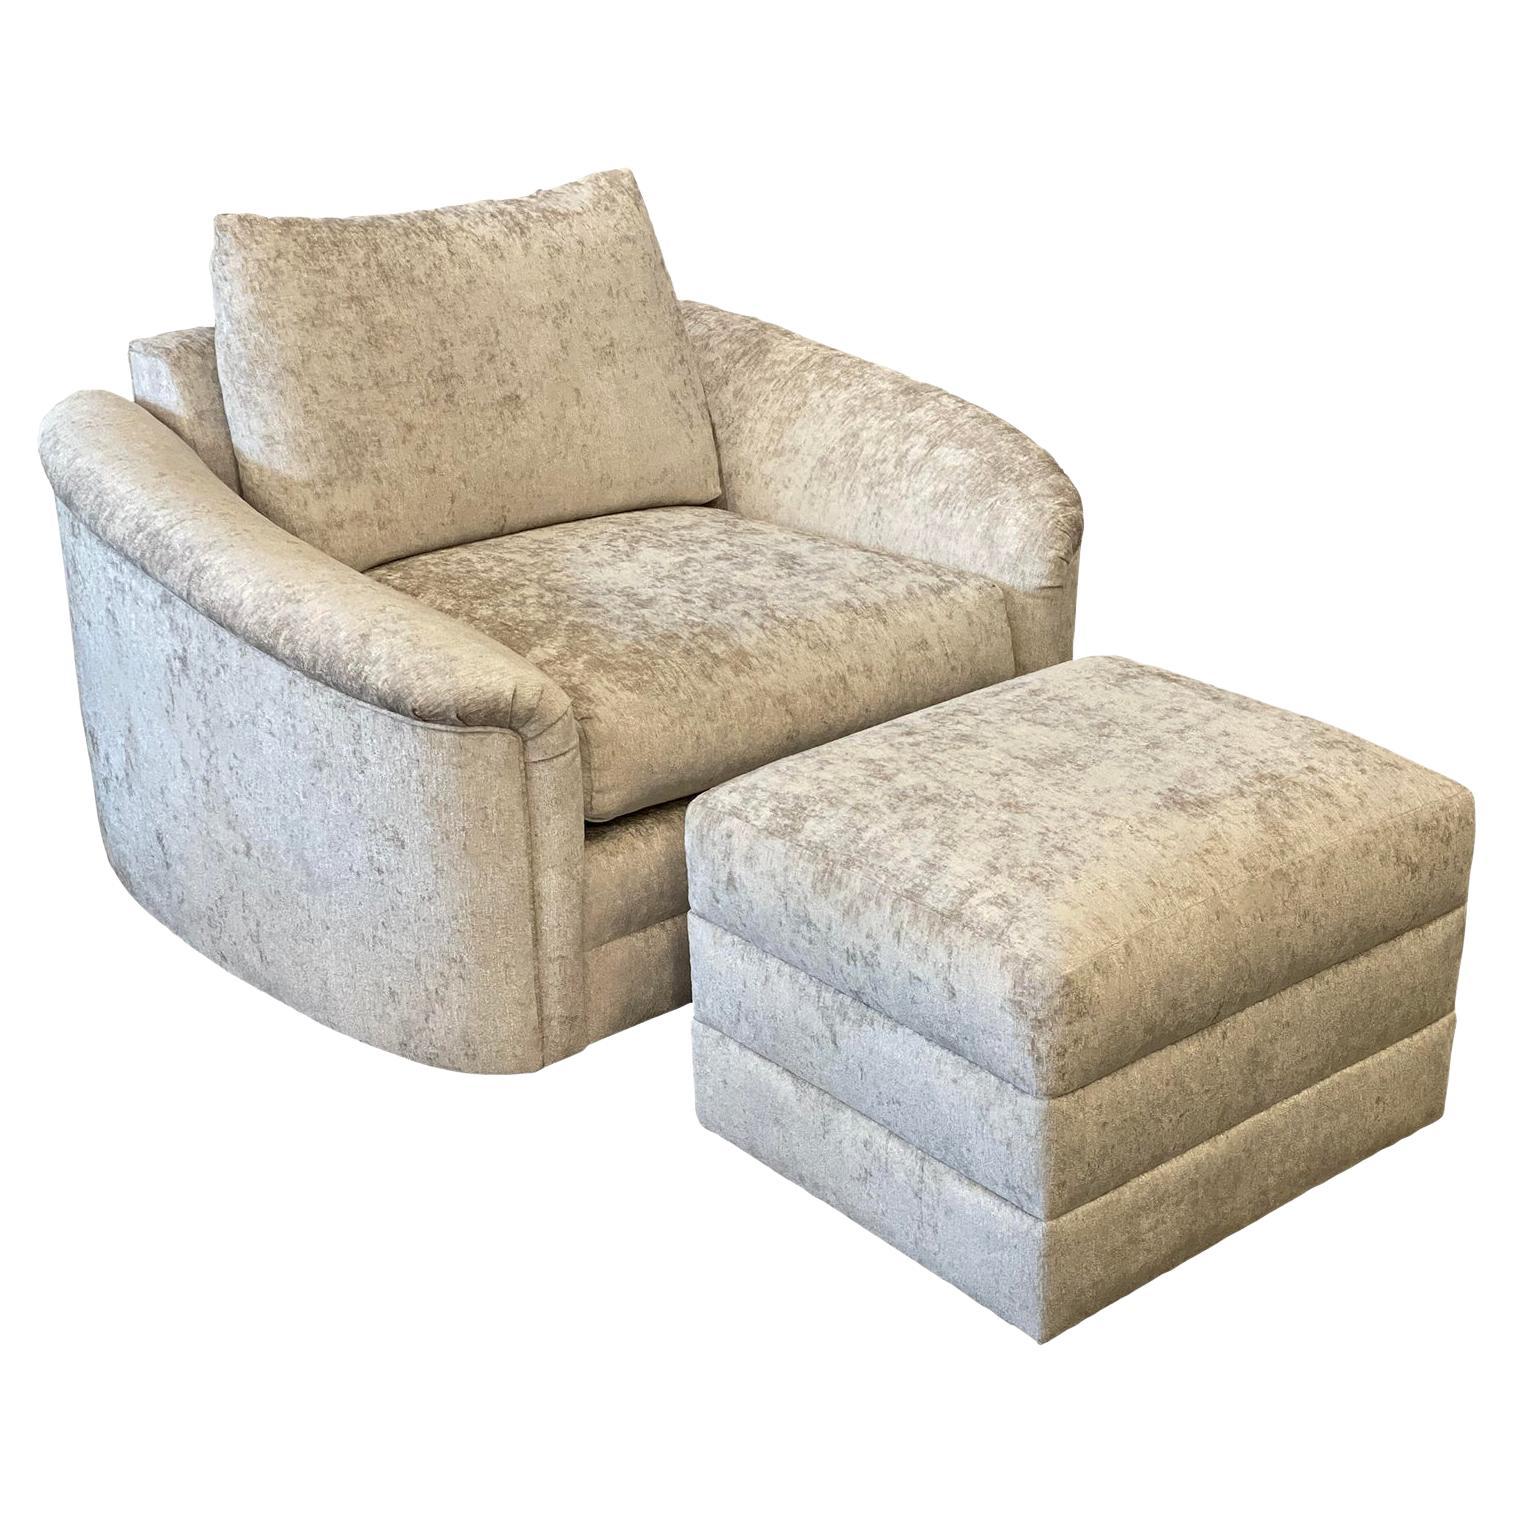 1980s Oversized Postmodern Swivel Chair and Ottoman Reupholstered - Set of 2 For Sale